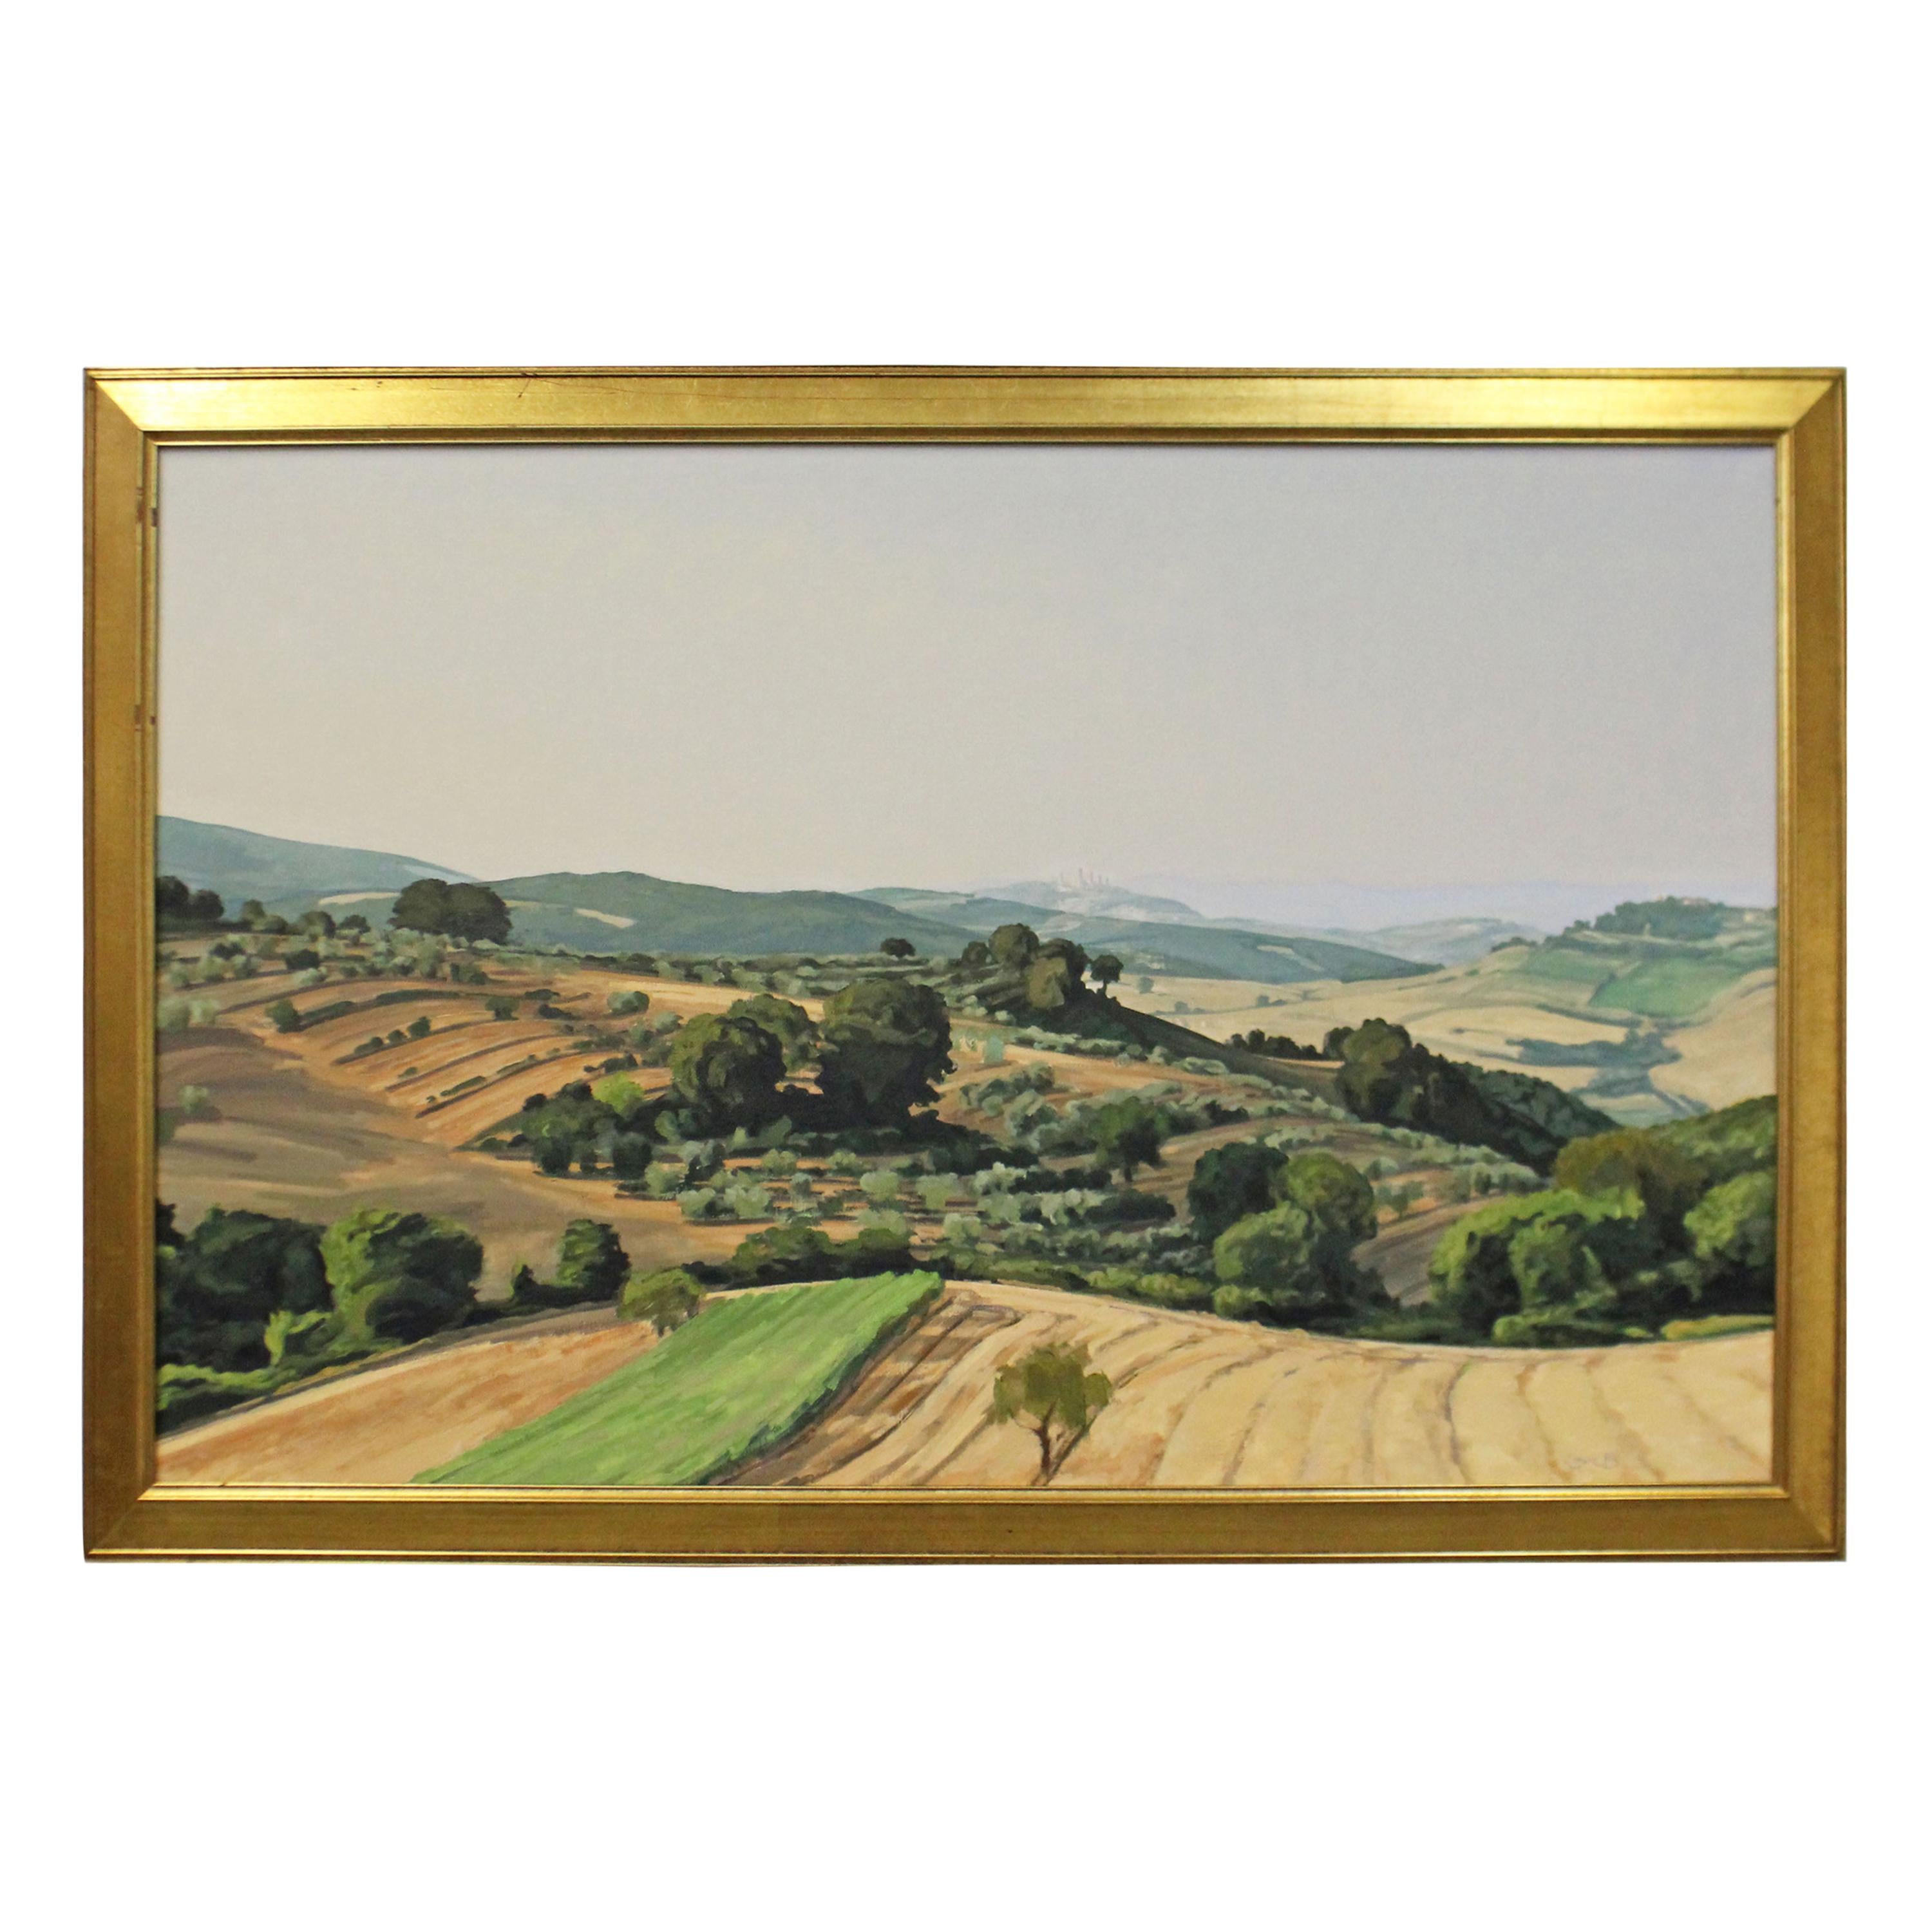 Distant View of San Gimignano Tuscan Country Side Landscape Art Oil Painting